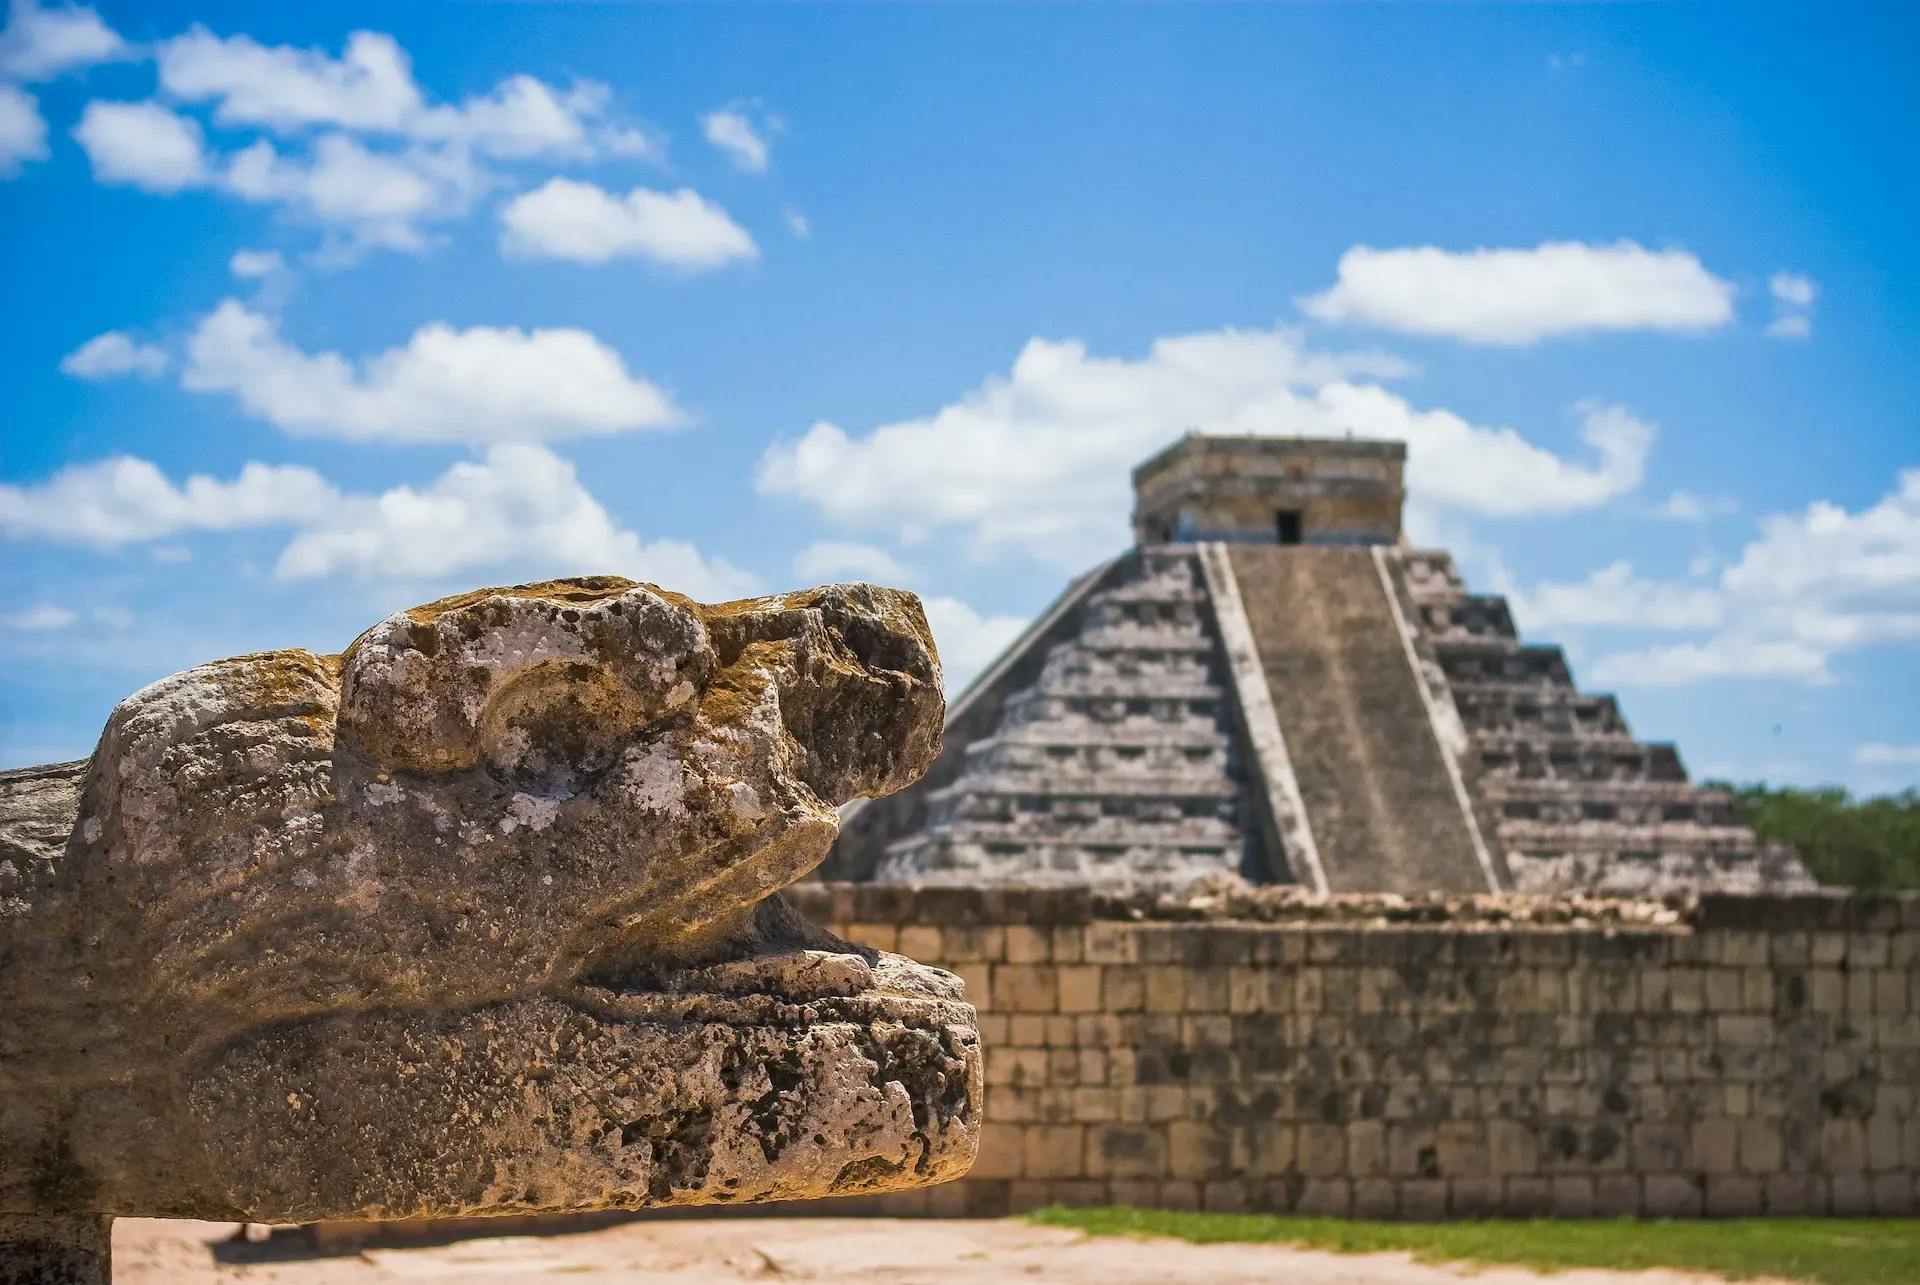 animal head sculpture on the left and the pyramid on the right in chichen itza